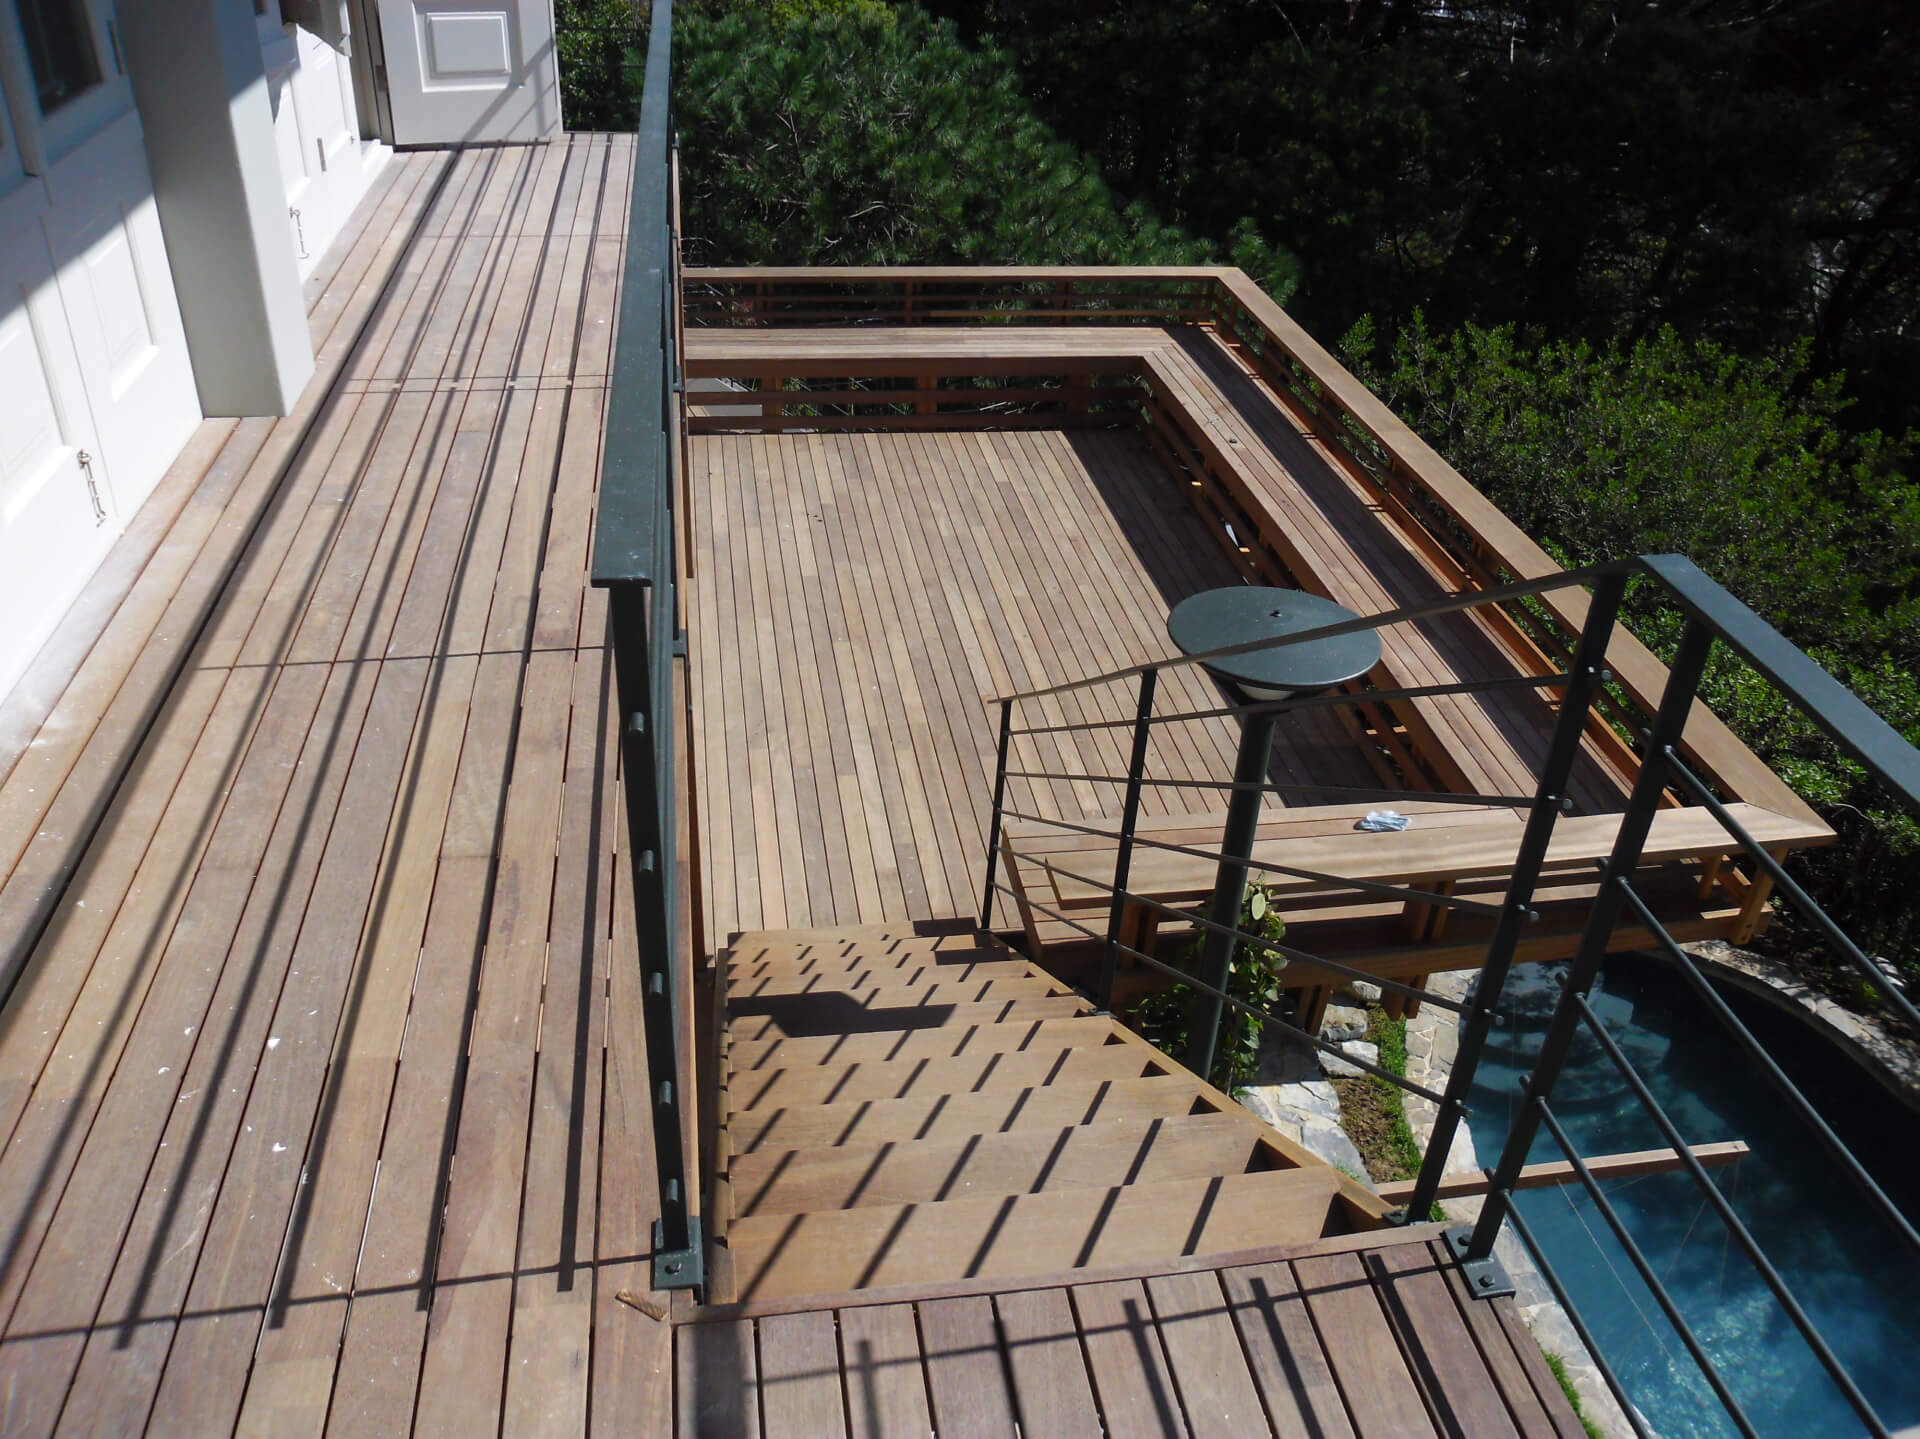 Suspended timber deck auckland top view